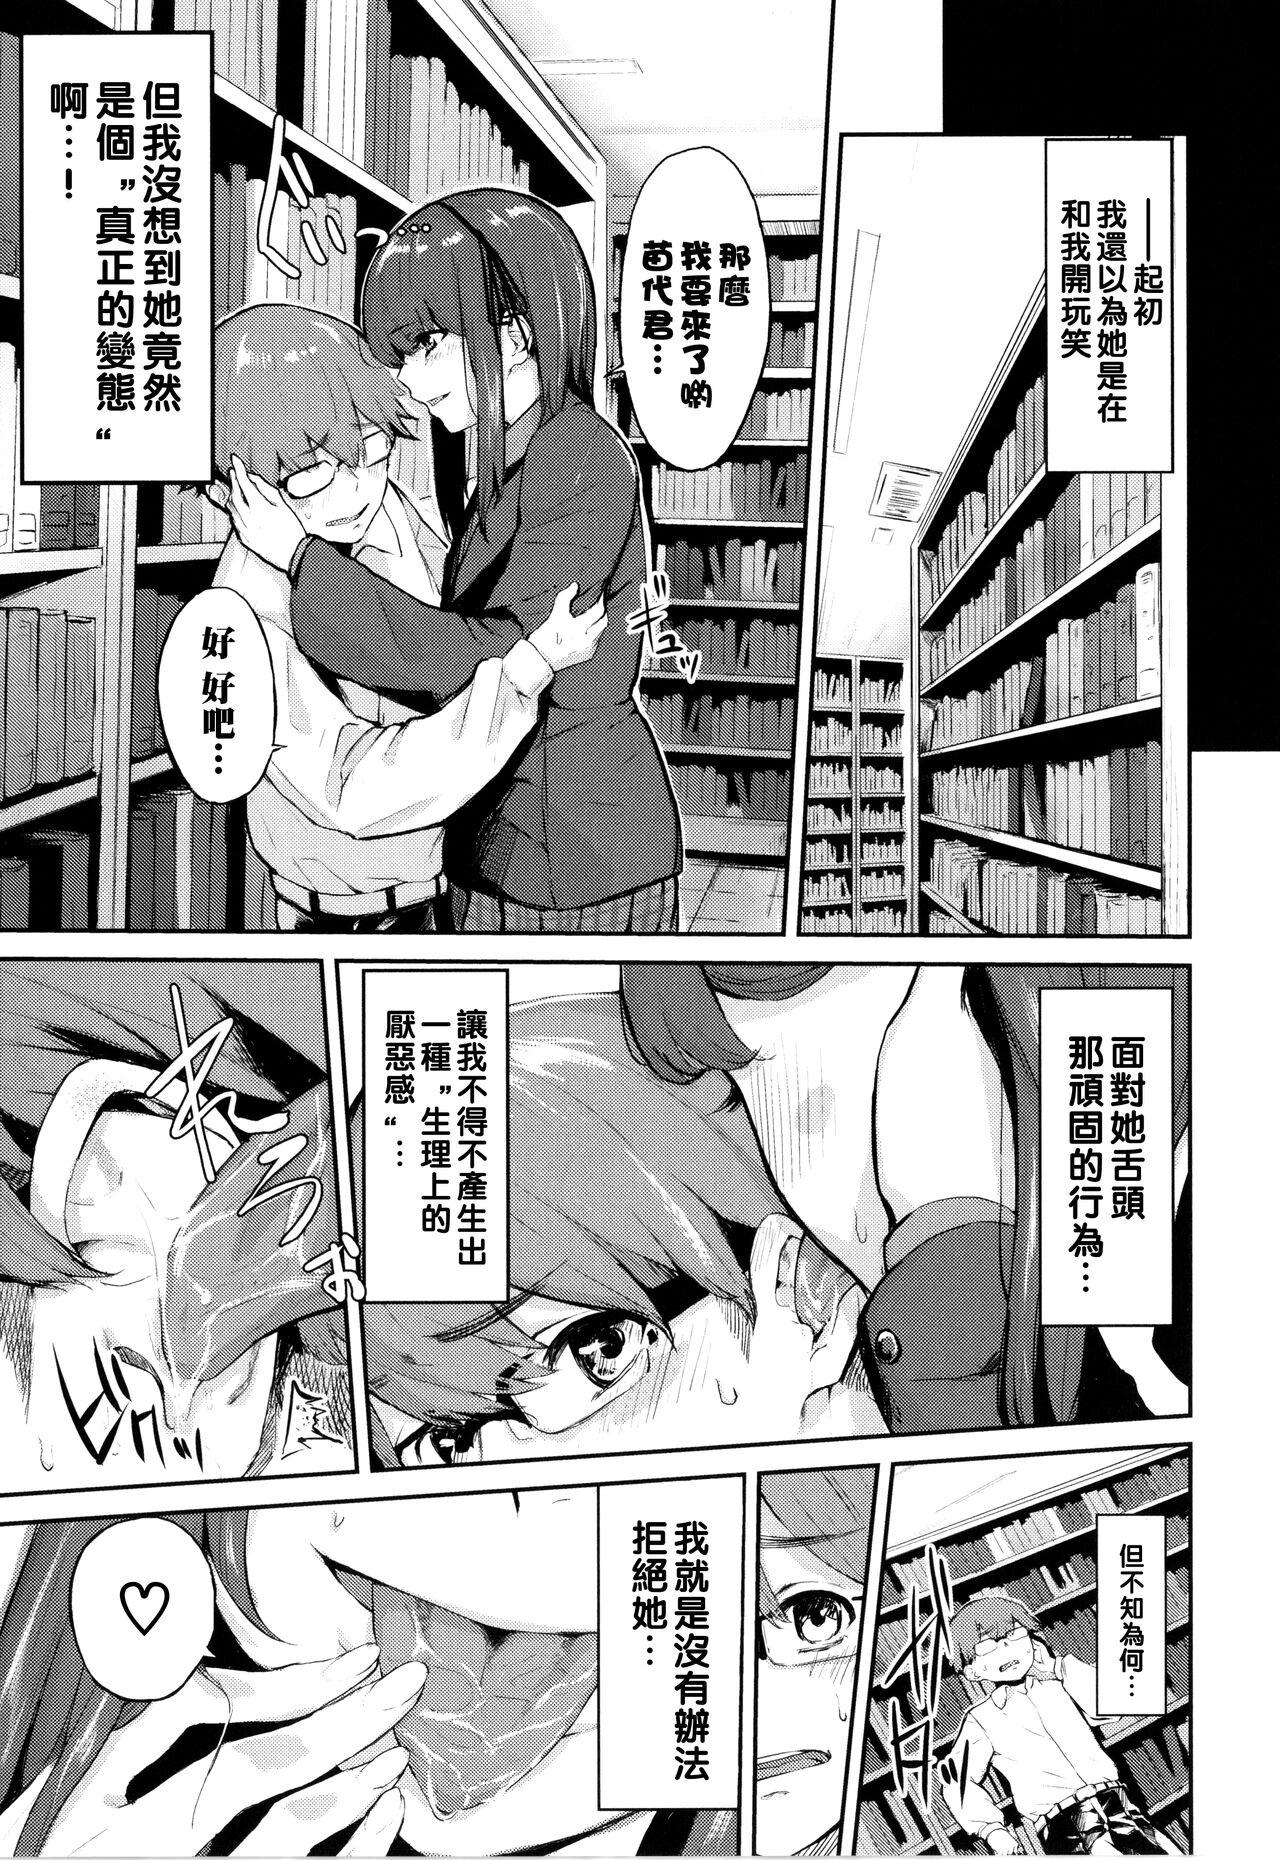 Amigo 図書室の秘密（Chinese） Best Blowjob - Picture 3